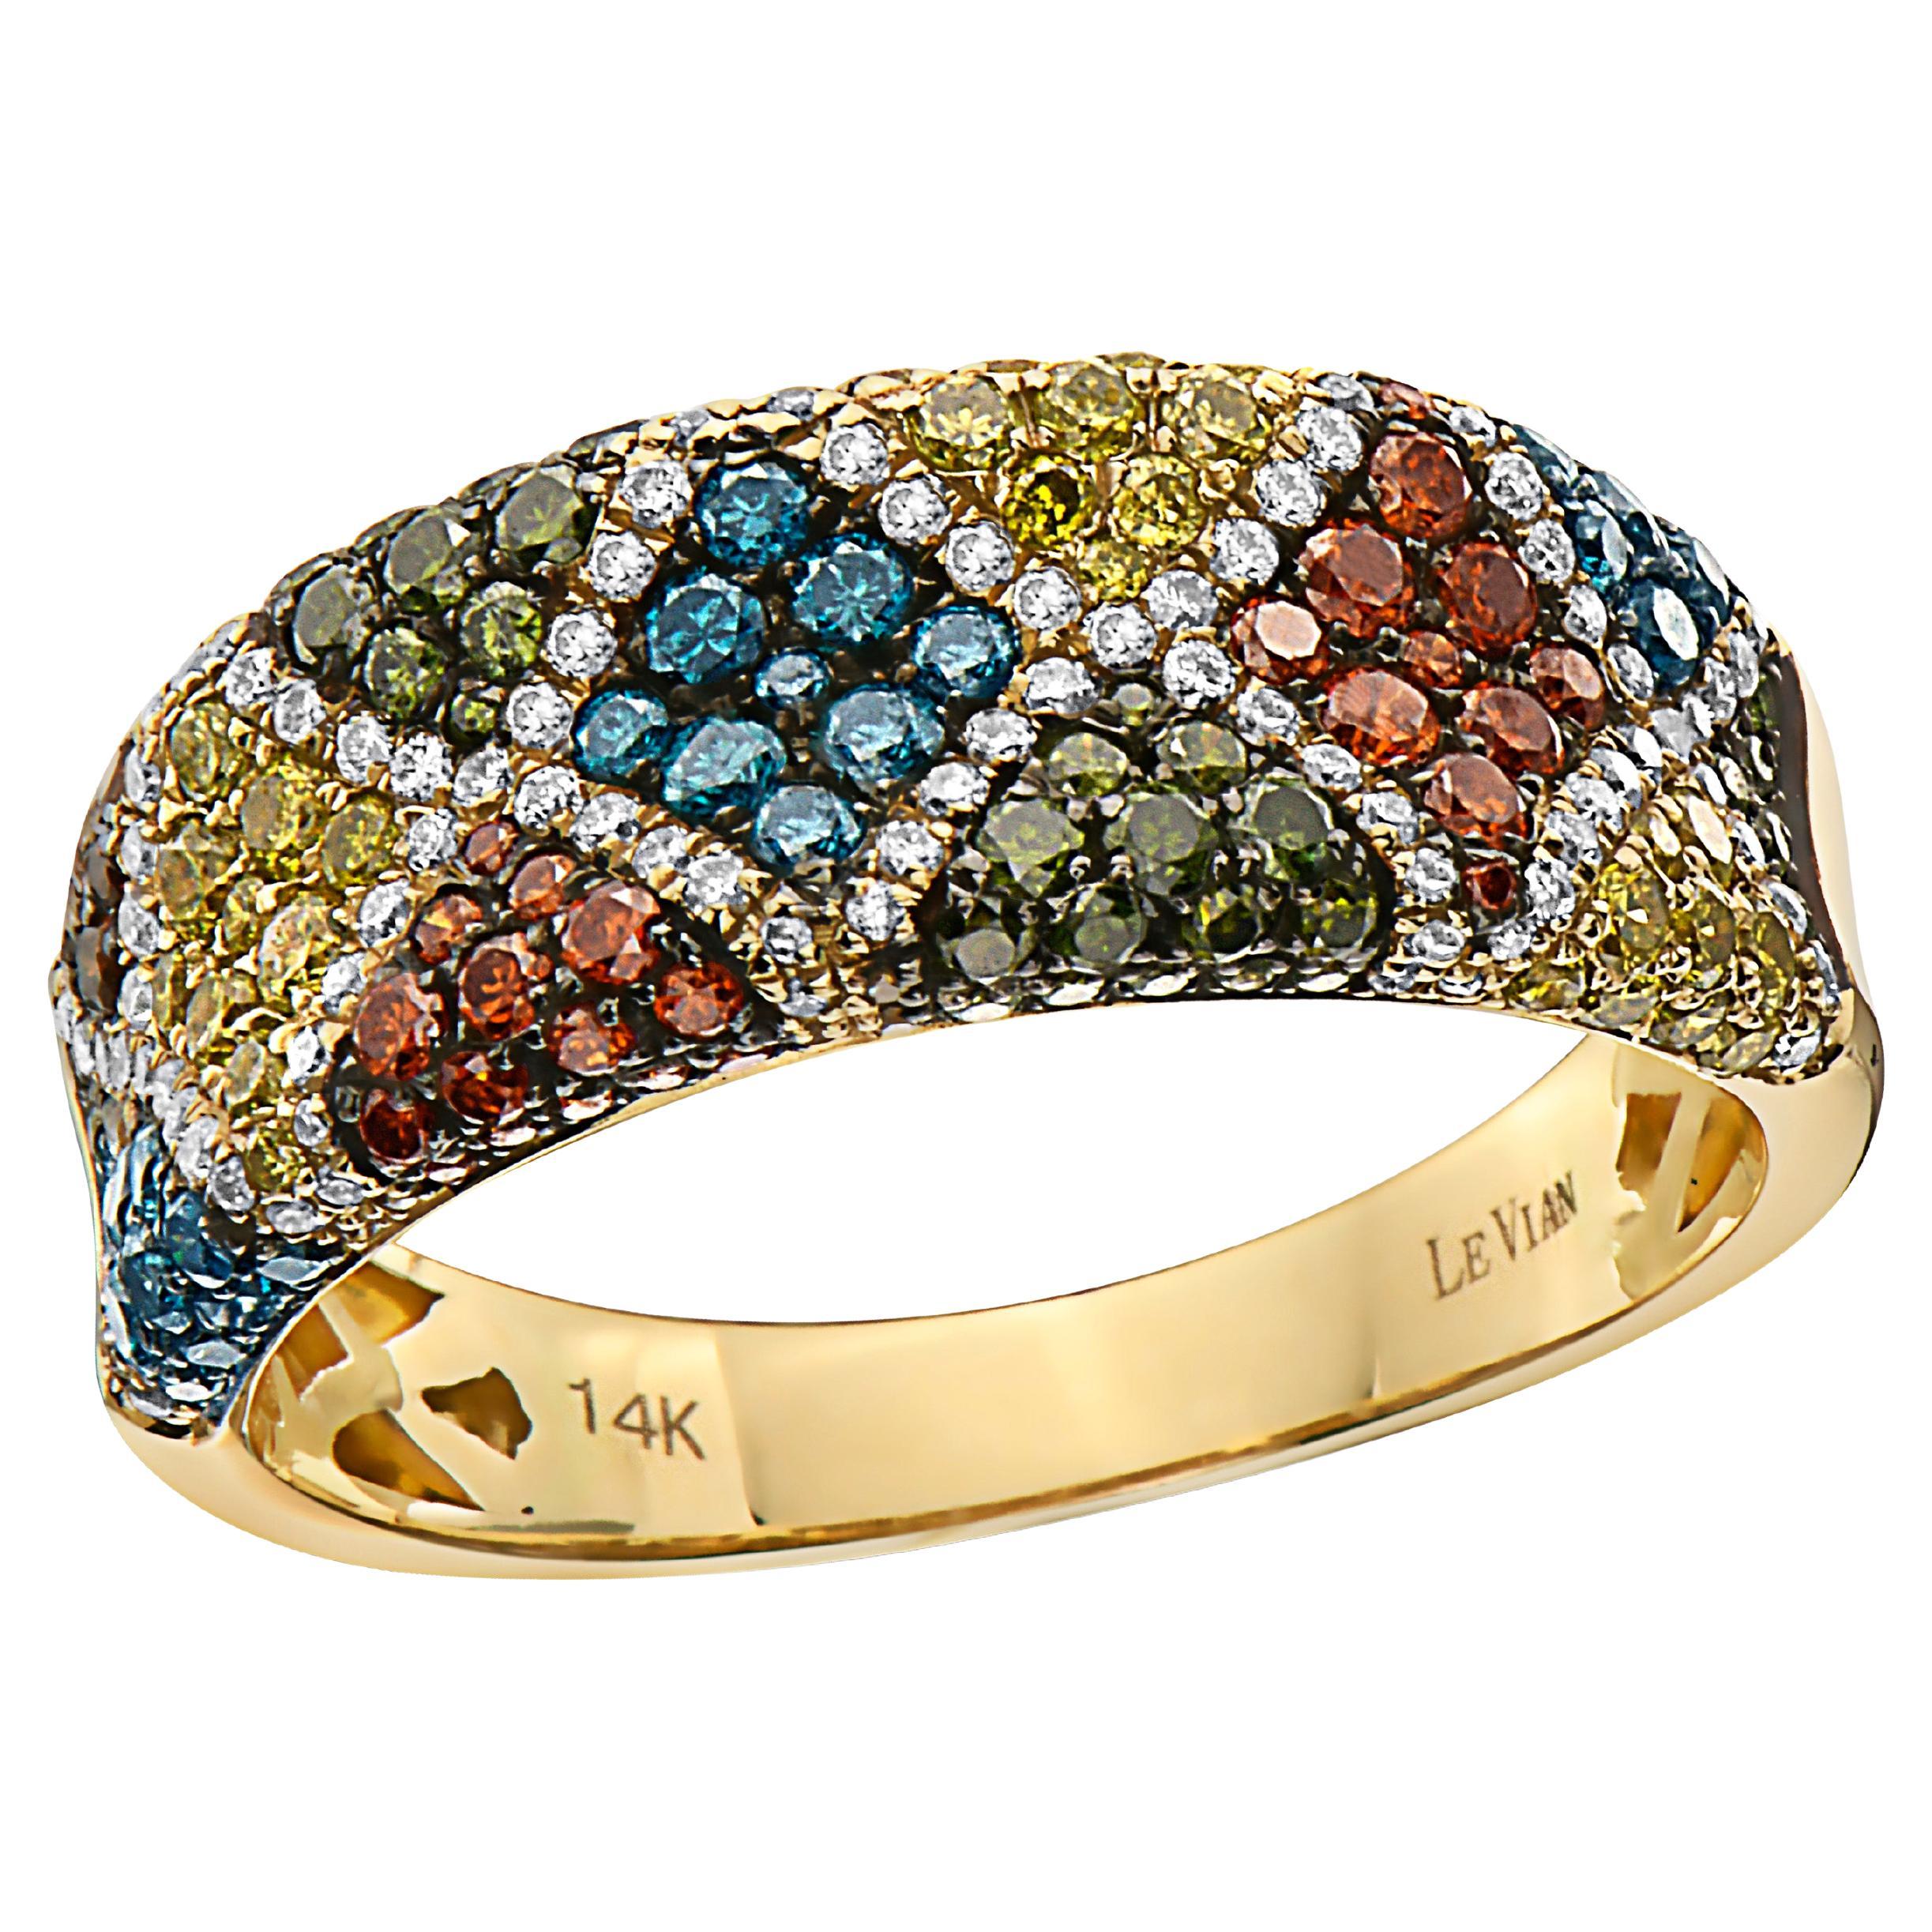 Levian Ring 1 1 4 Cts Blue Yellow White Natural Diamond Set in 14K Yellow Gold